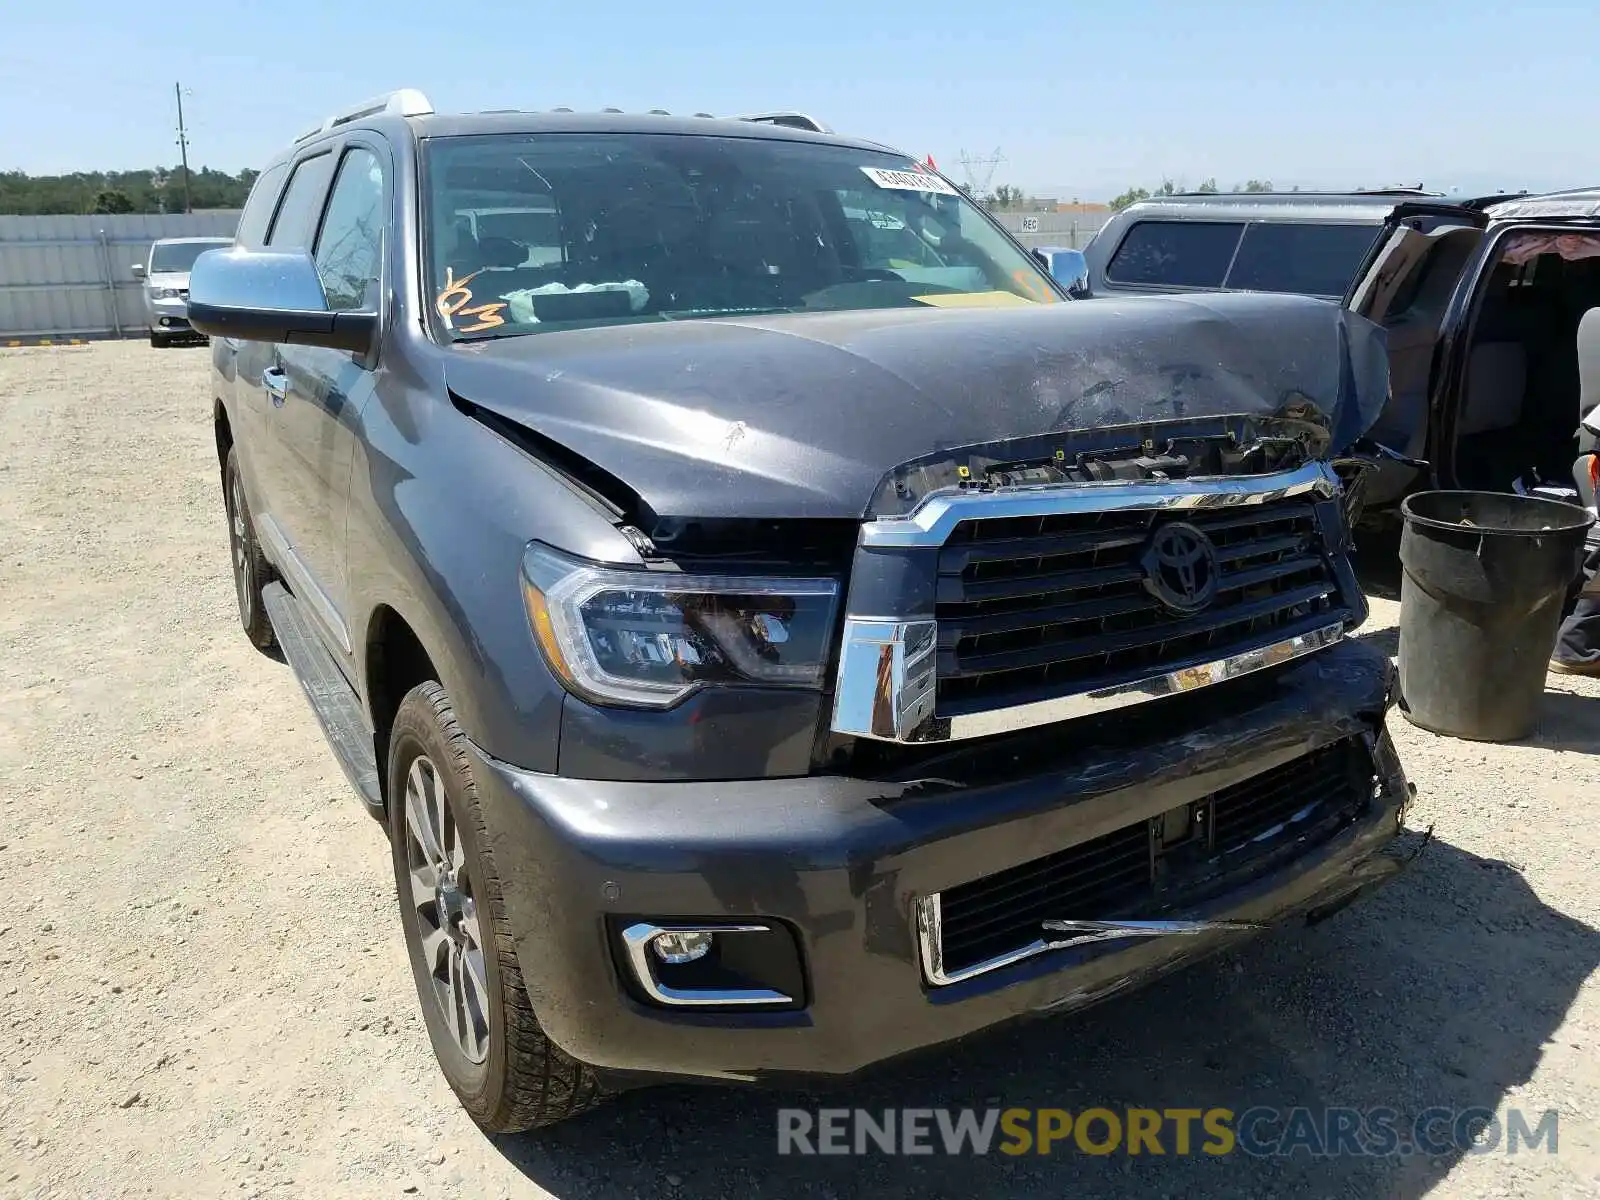 1 Photograph of a damaged car 5TDJY5G11KS165869 TOYOTA SEQUOIA 2019